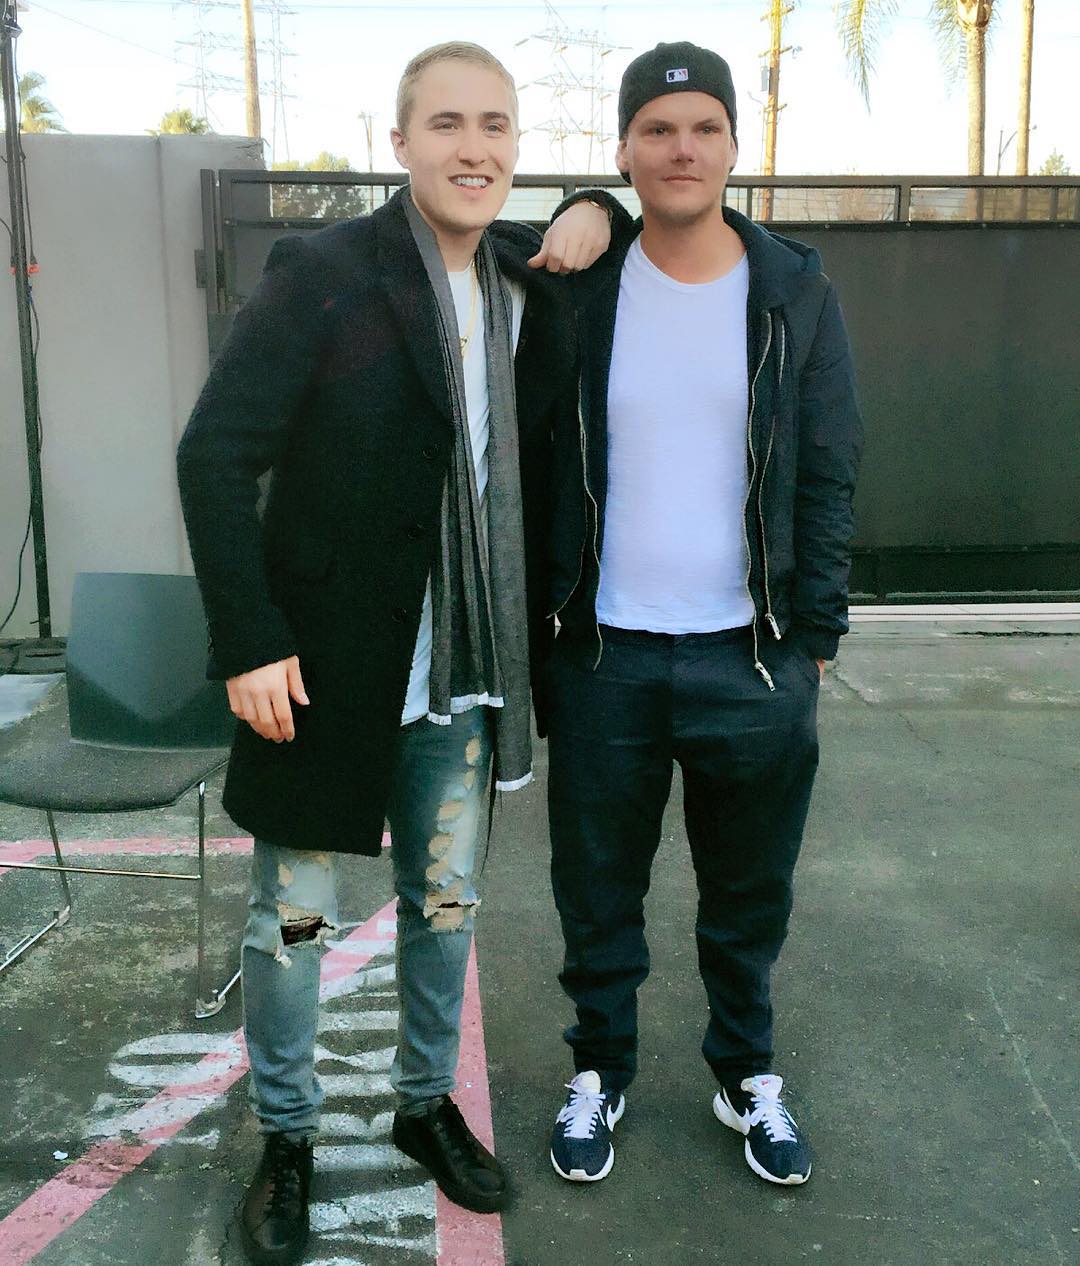 Mike Posner and Avicii at iHeartRadio - Universal Studios in Los Angeles, CA on February 3, 2016.